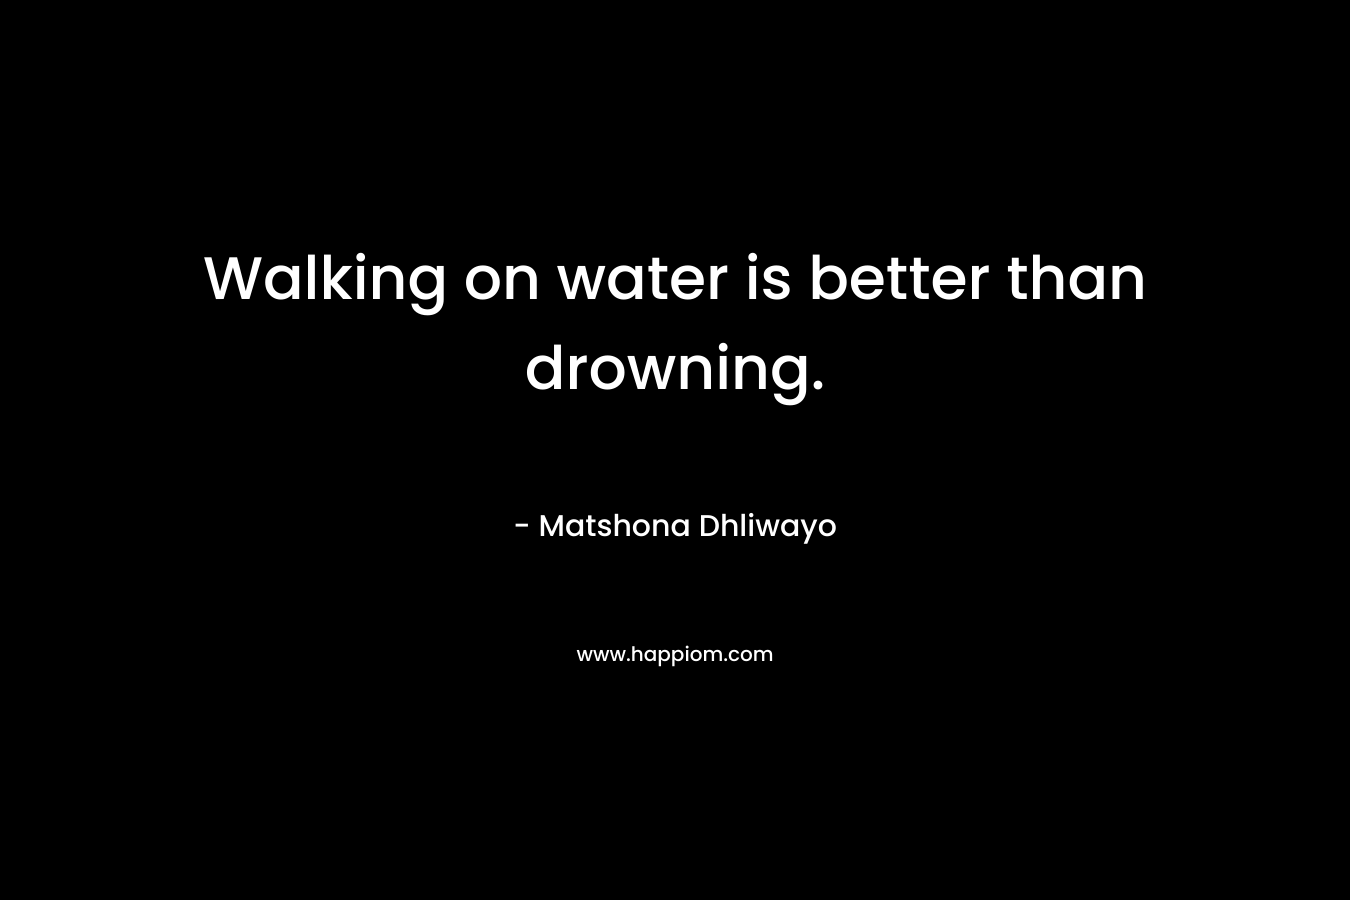 Walking on water is better than drowning.